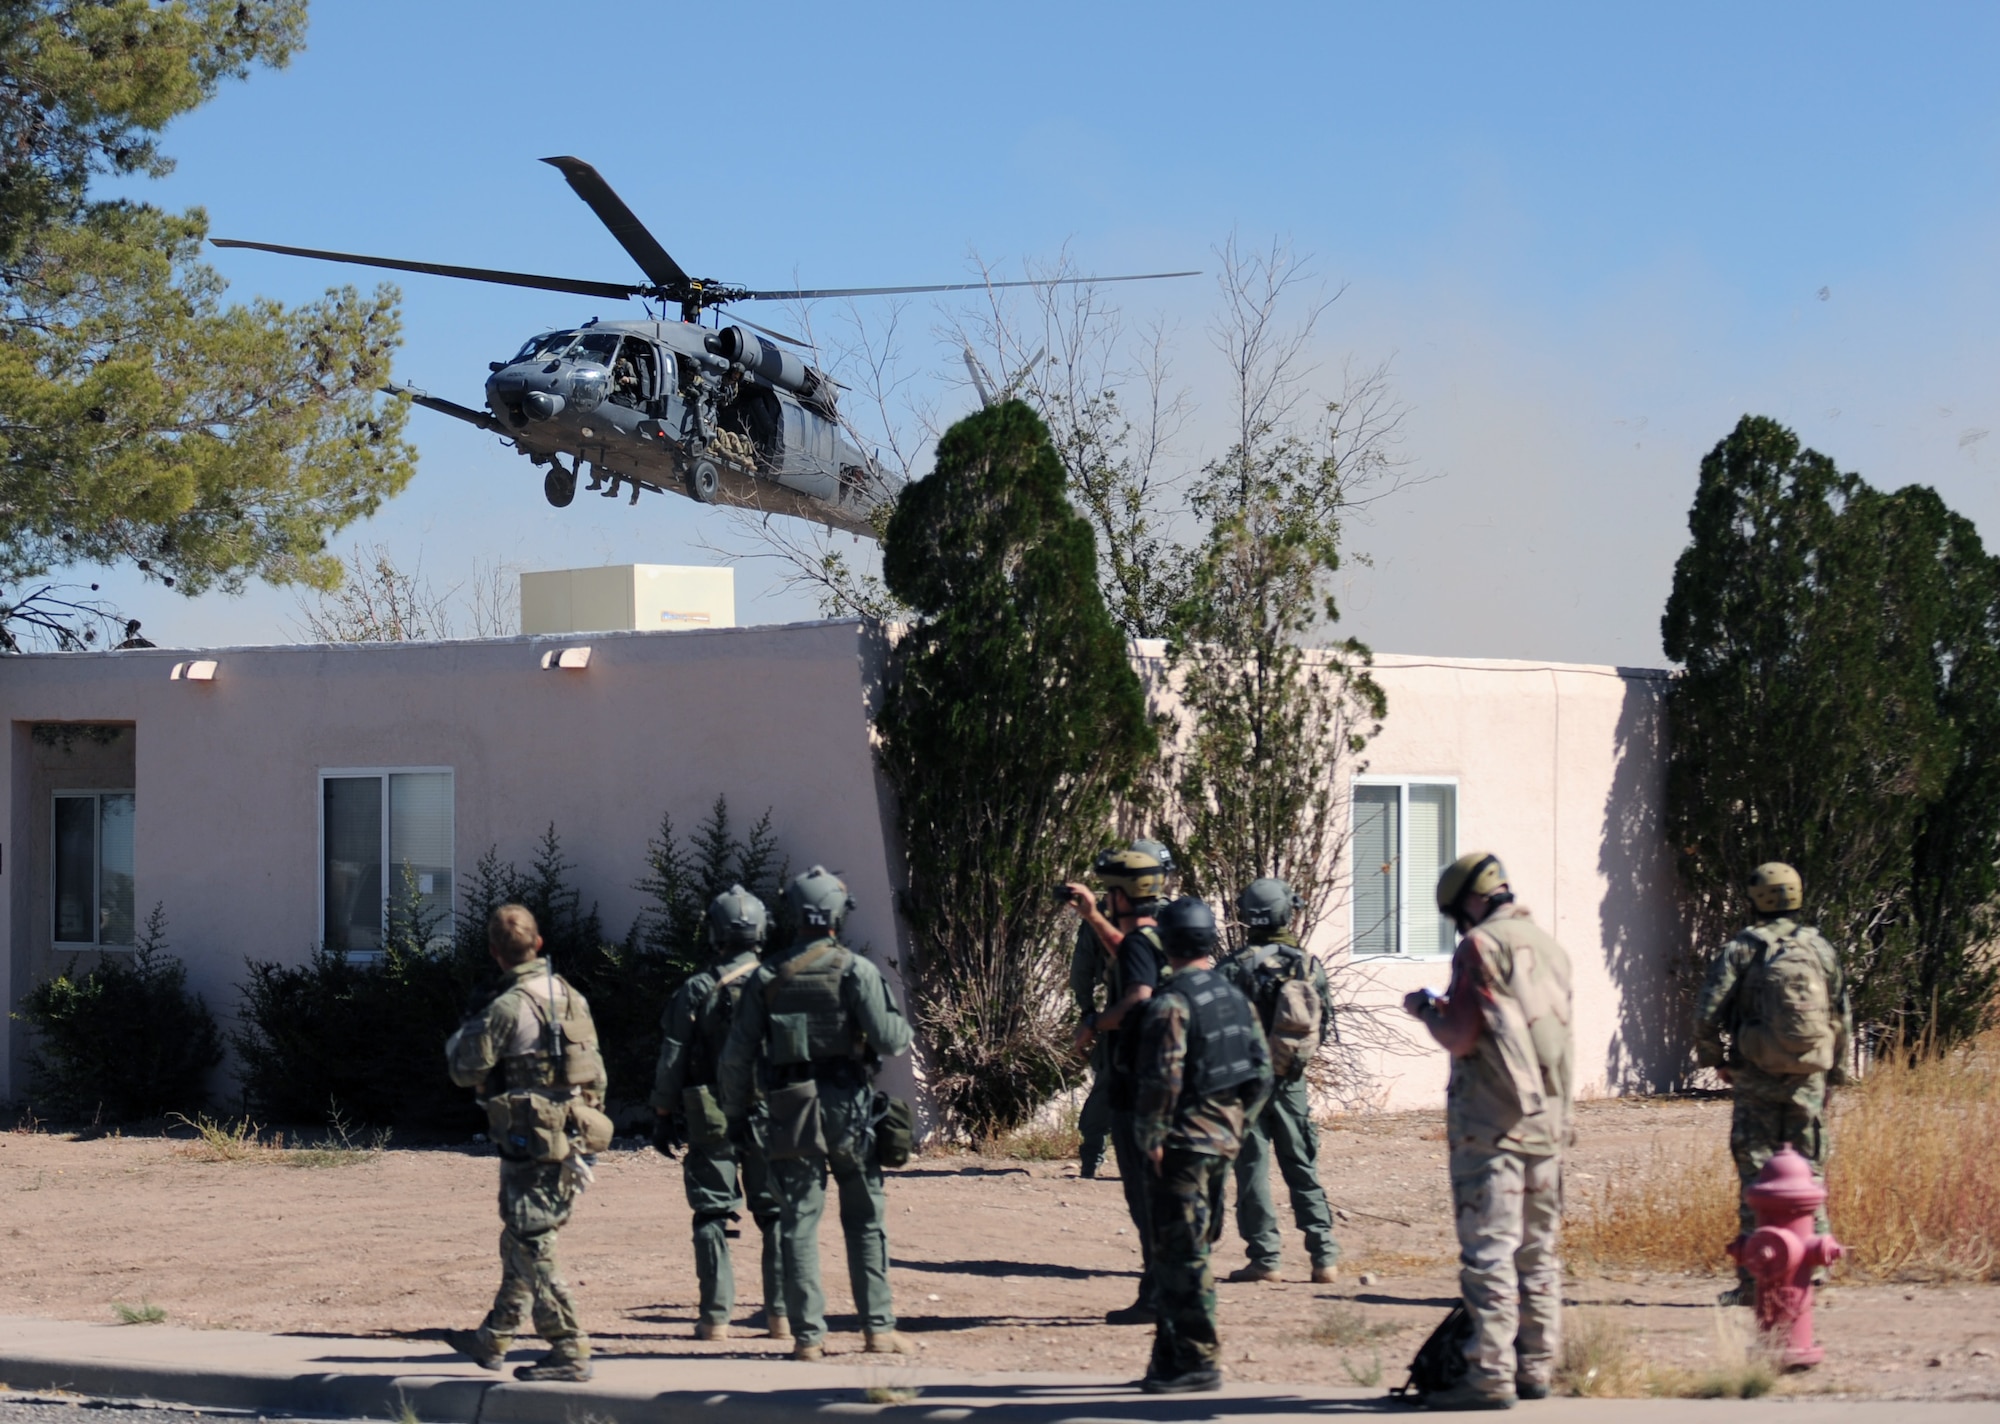 PLAYAS, N.M. – Border Patrol’s tactical unit and pararescuemen wait for a helicopter to land so they can transport two hostages after successfully rescuing them from captivity during a hostage rescue scenario at Playas Training and Research Facility in New Mexico Oct. 20. Playas is a training facility that military branches and government agencies use to practice real world scenarios without the worry of injury. (U.S. Air Force photo/Airman 1st Class Michael Washburn)